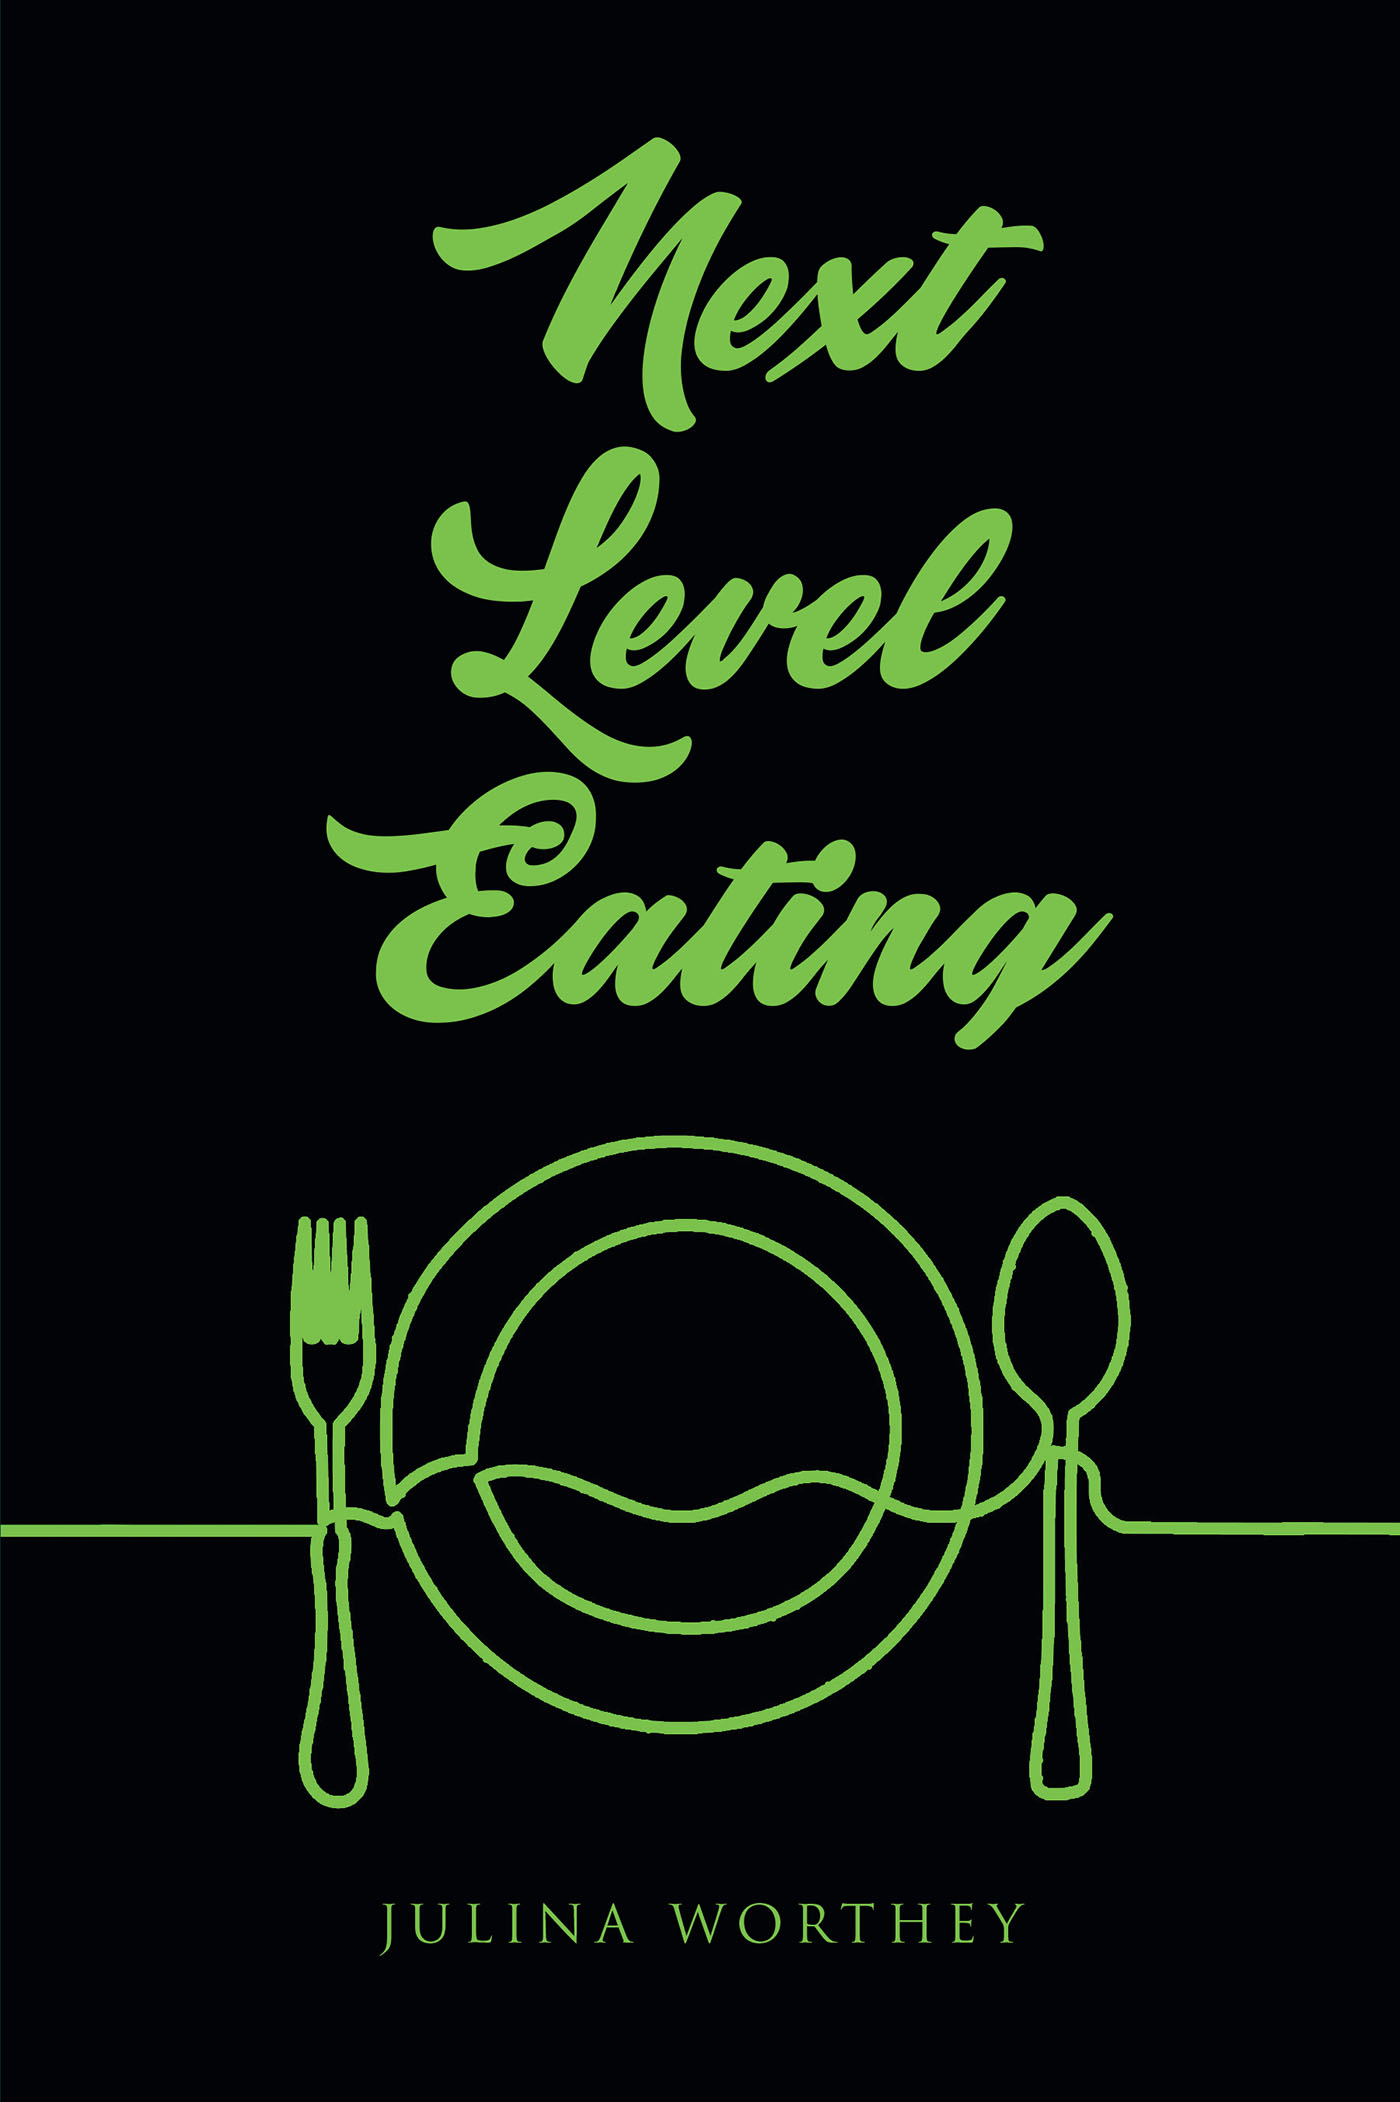 Author Julina Worthey’s New Book, "Next Level Eating," is a Mouth-Watering Cookbook for Indecisive Eaters Who Crave Balance and Flexibility